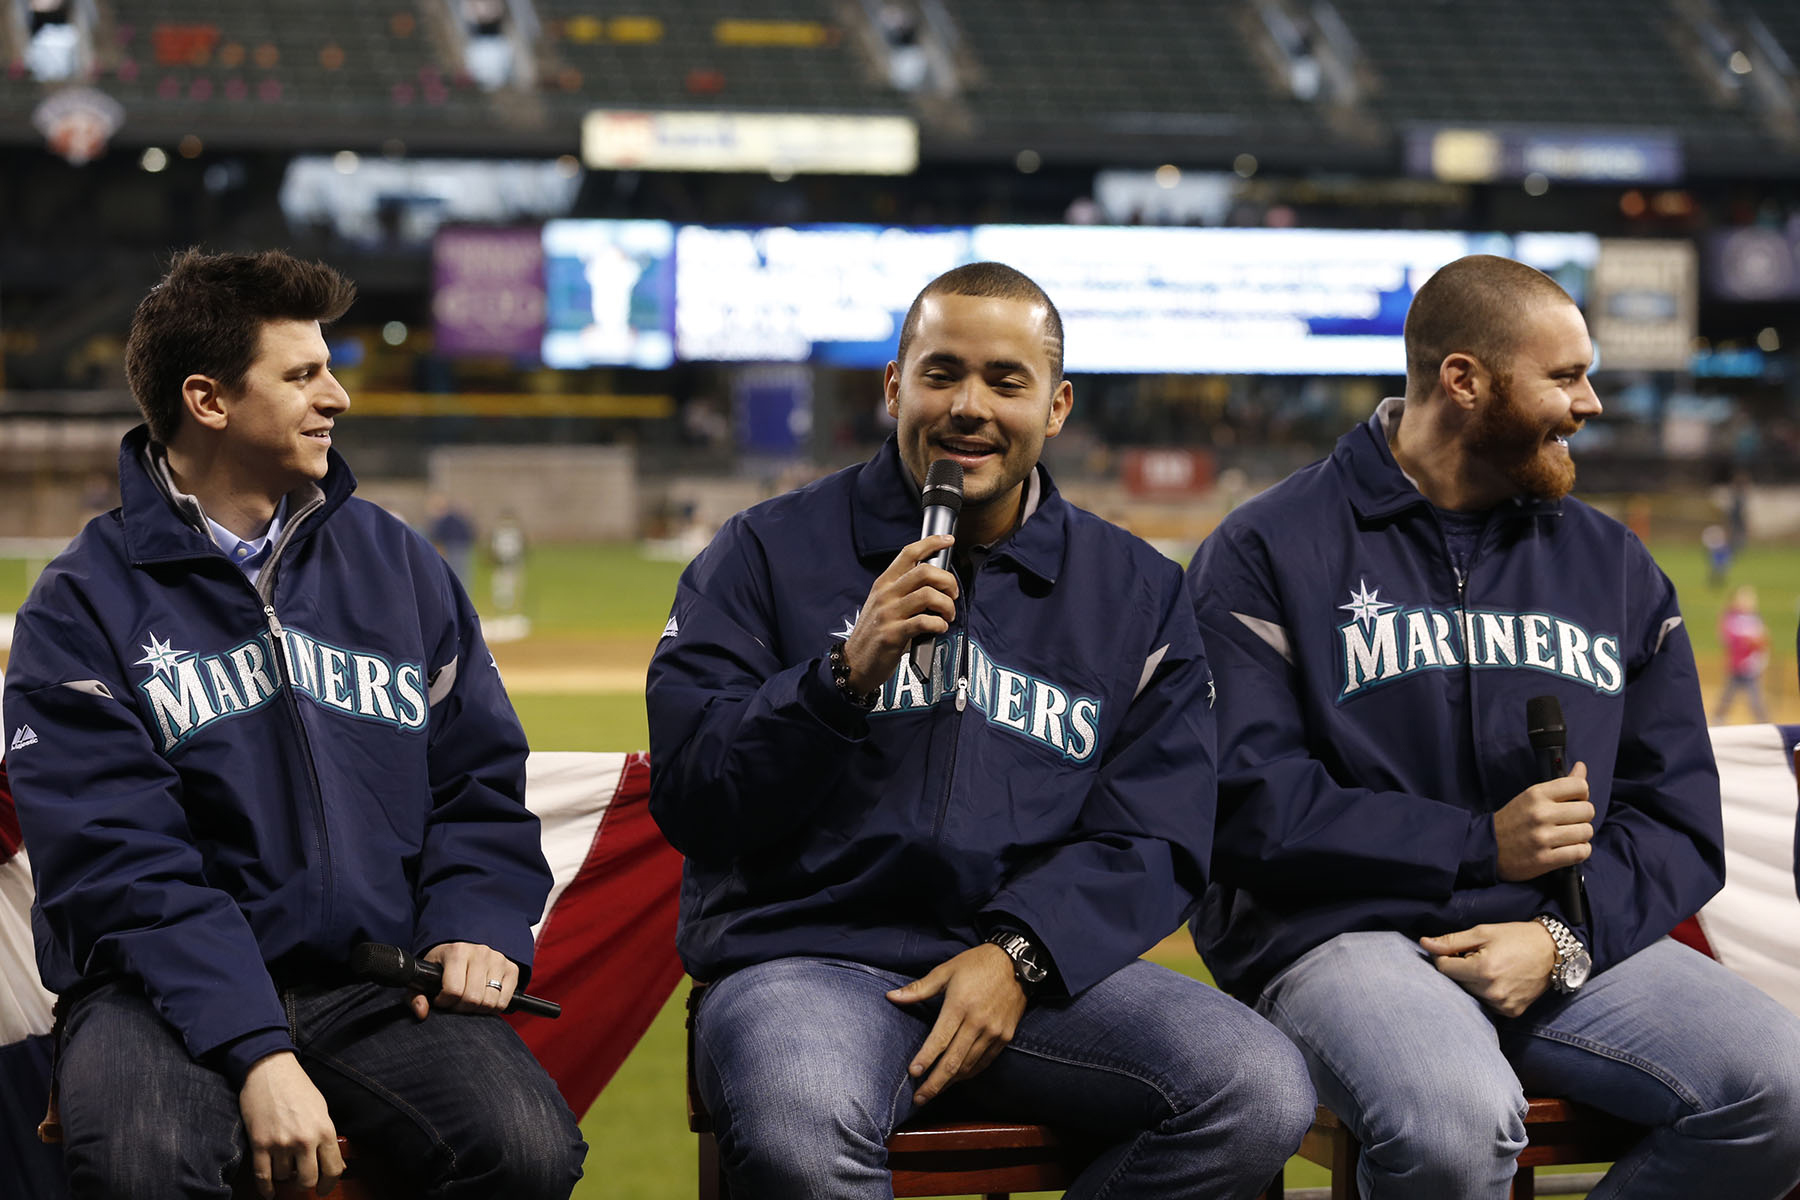 The Mariners began their 2013 home campaign with a 3-0 win Monday